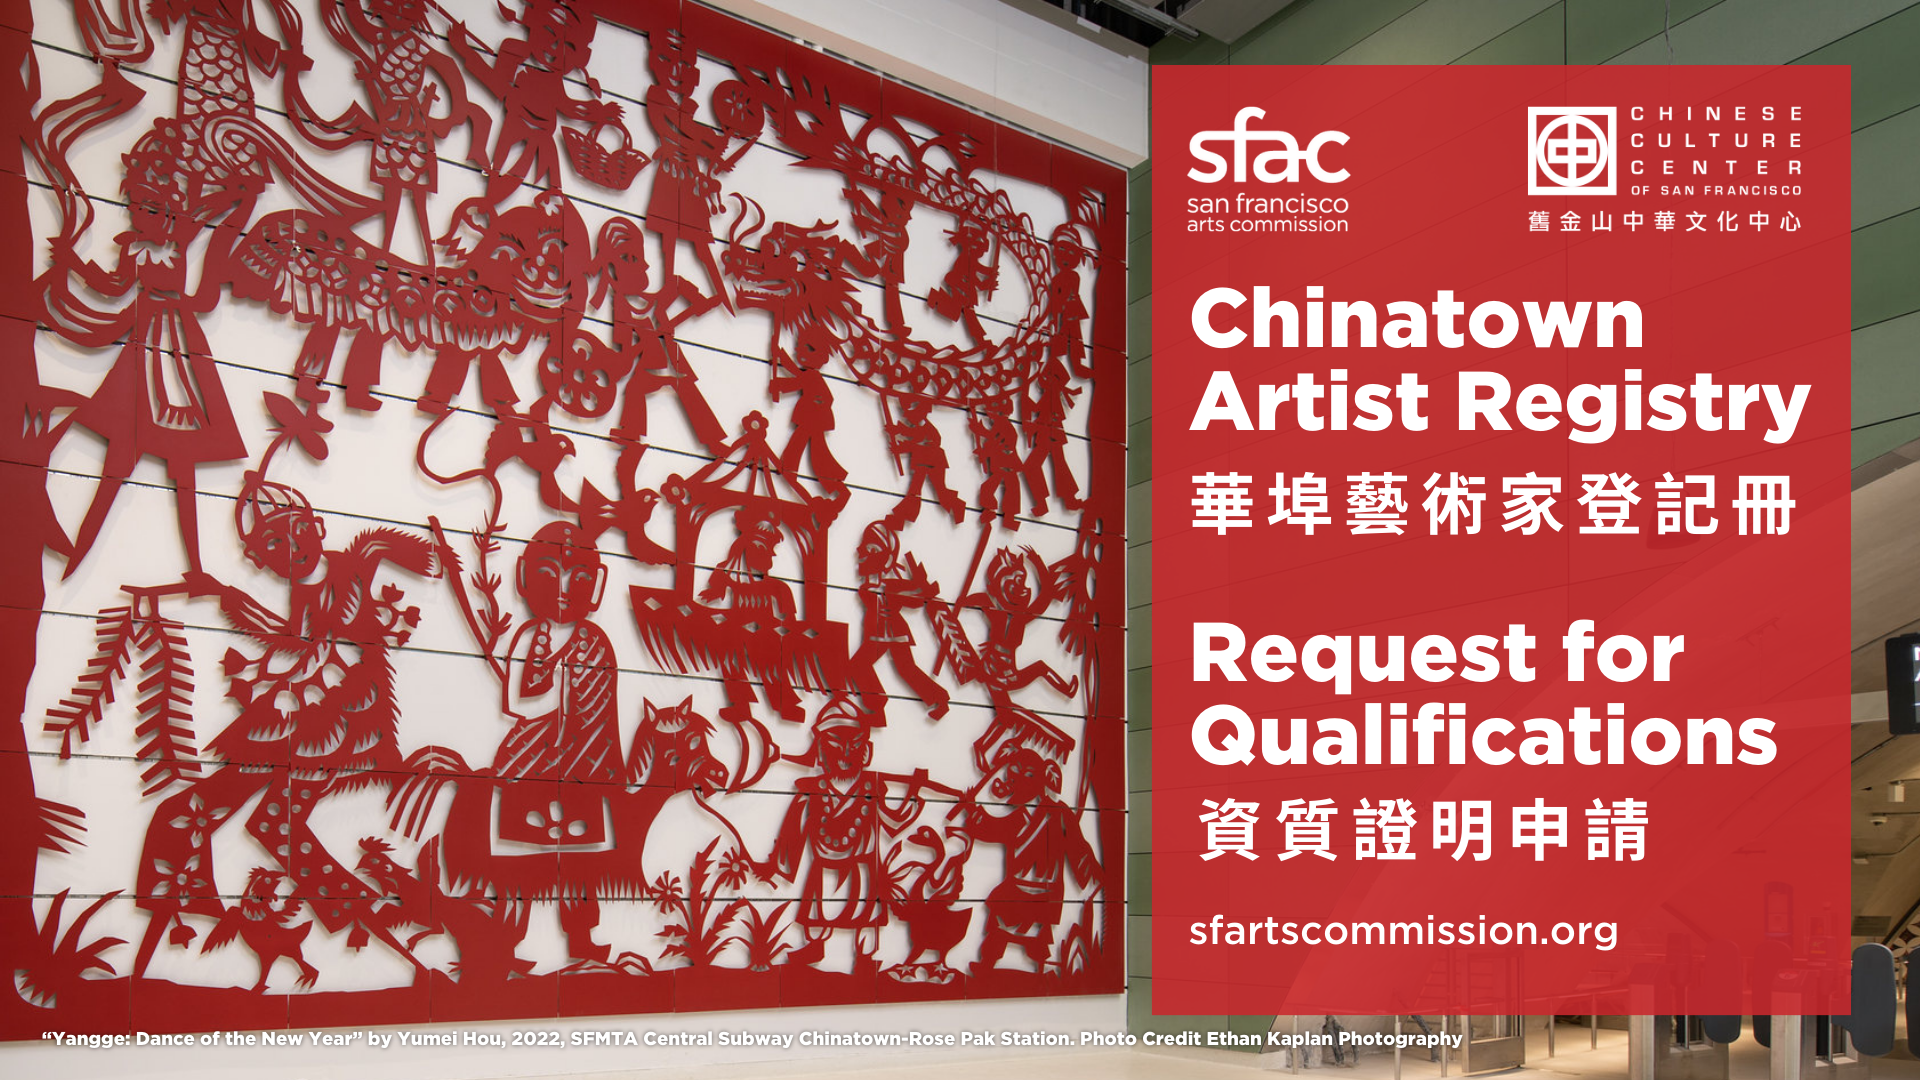 Image of red paper cut wall art installation by Yumei Hou at Chinatown Rose Pak Station